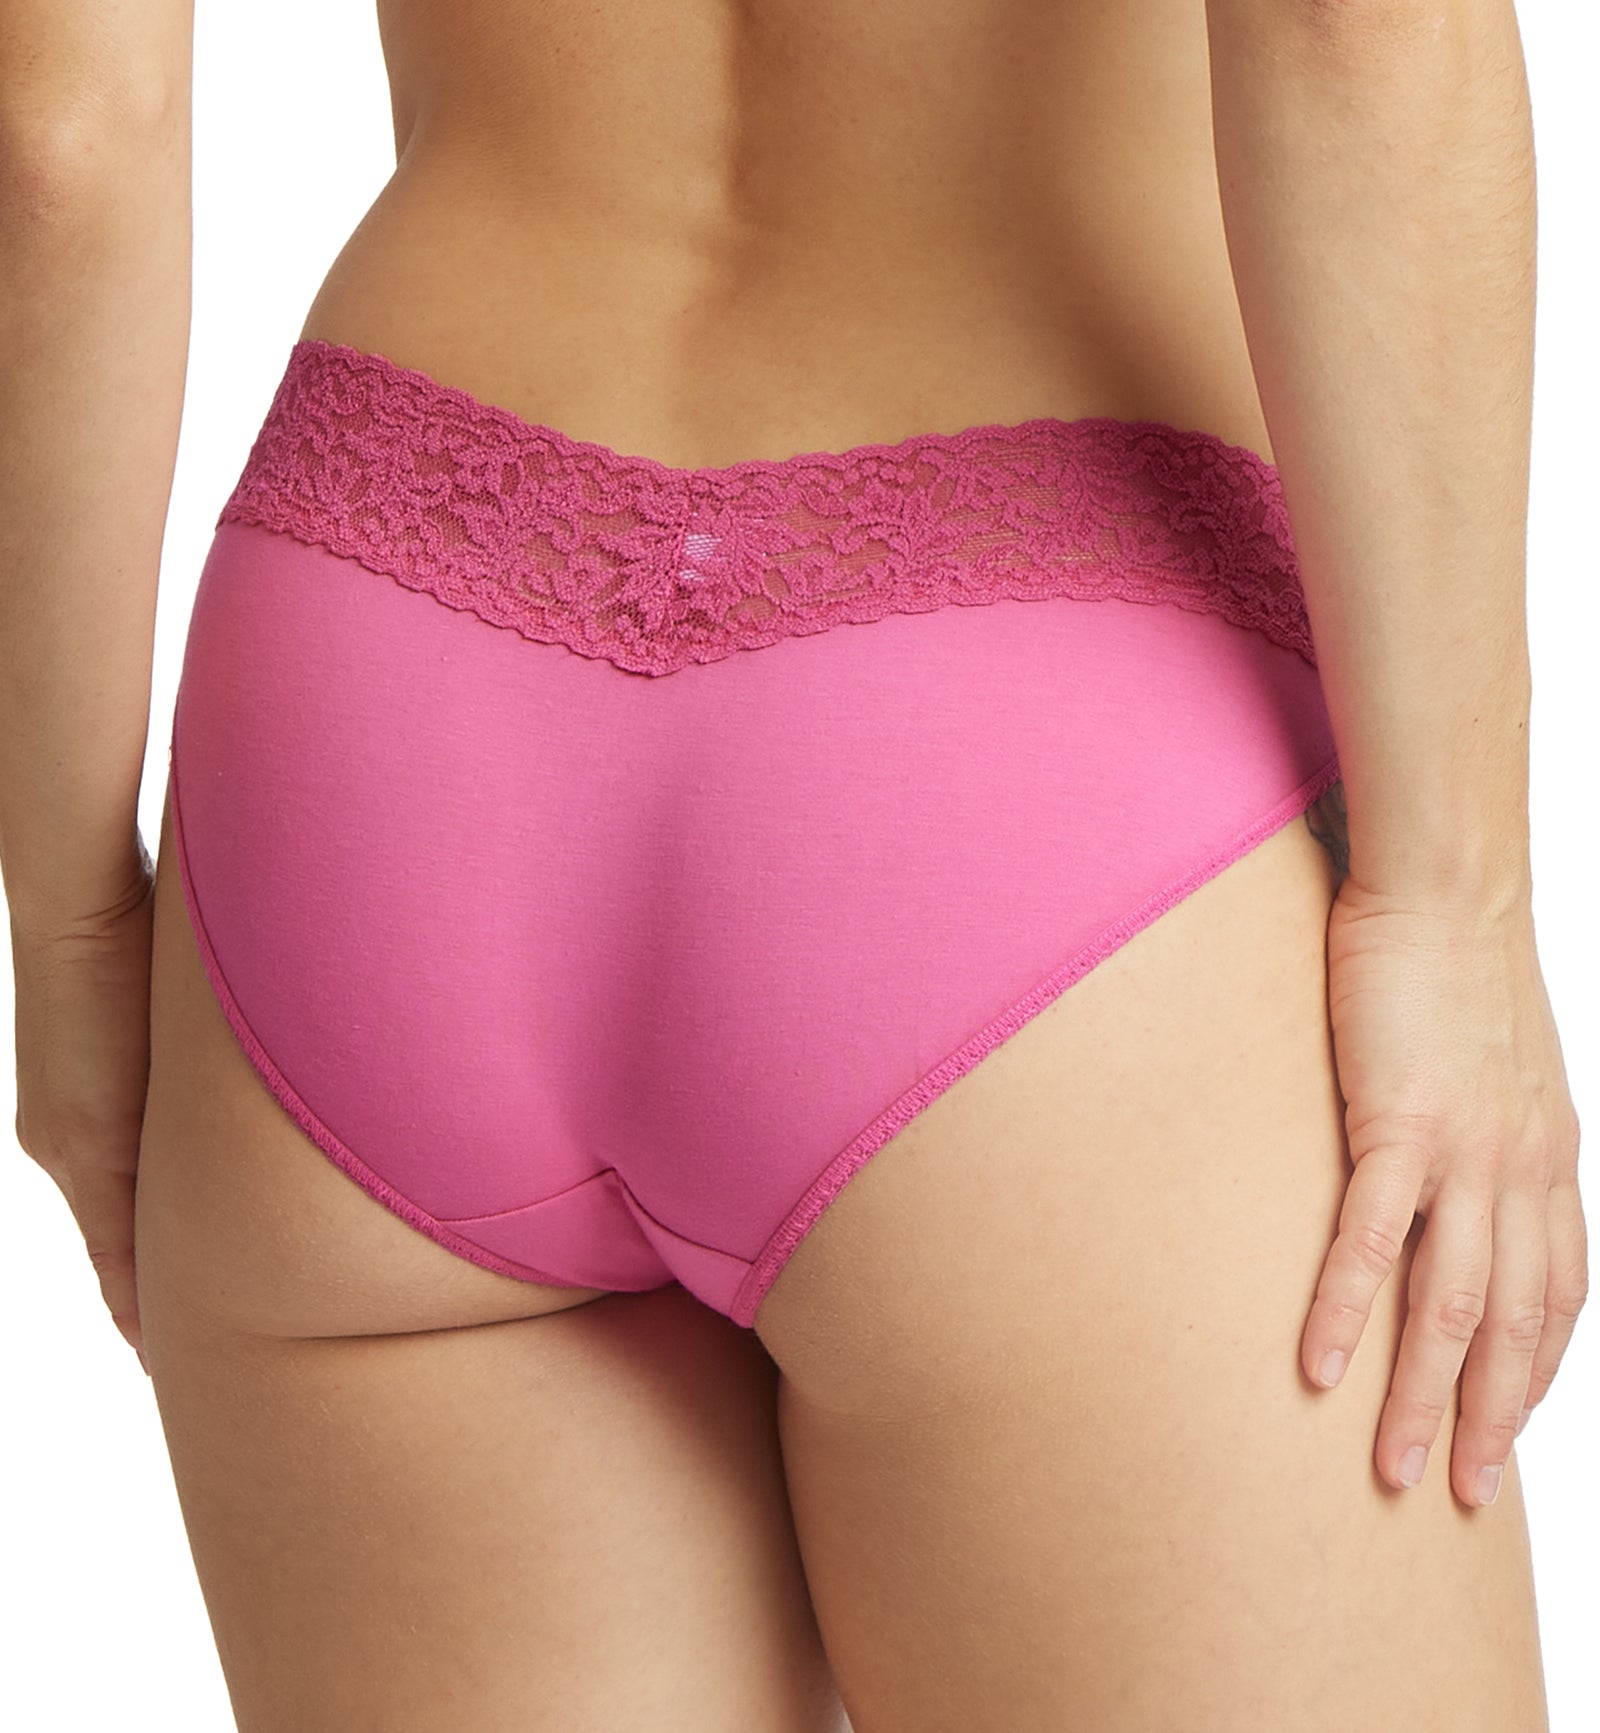 Hanky Panky Organic Cotton V-kini with Lace (892201),Small,Wild Pink - Wild Pink,Small